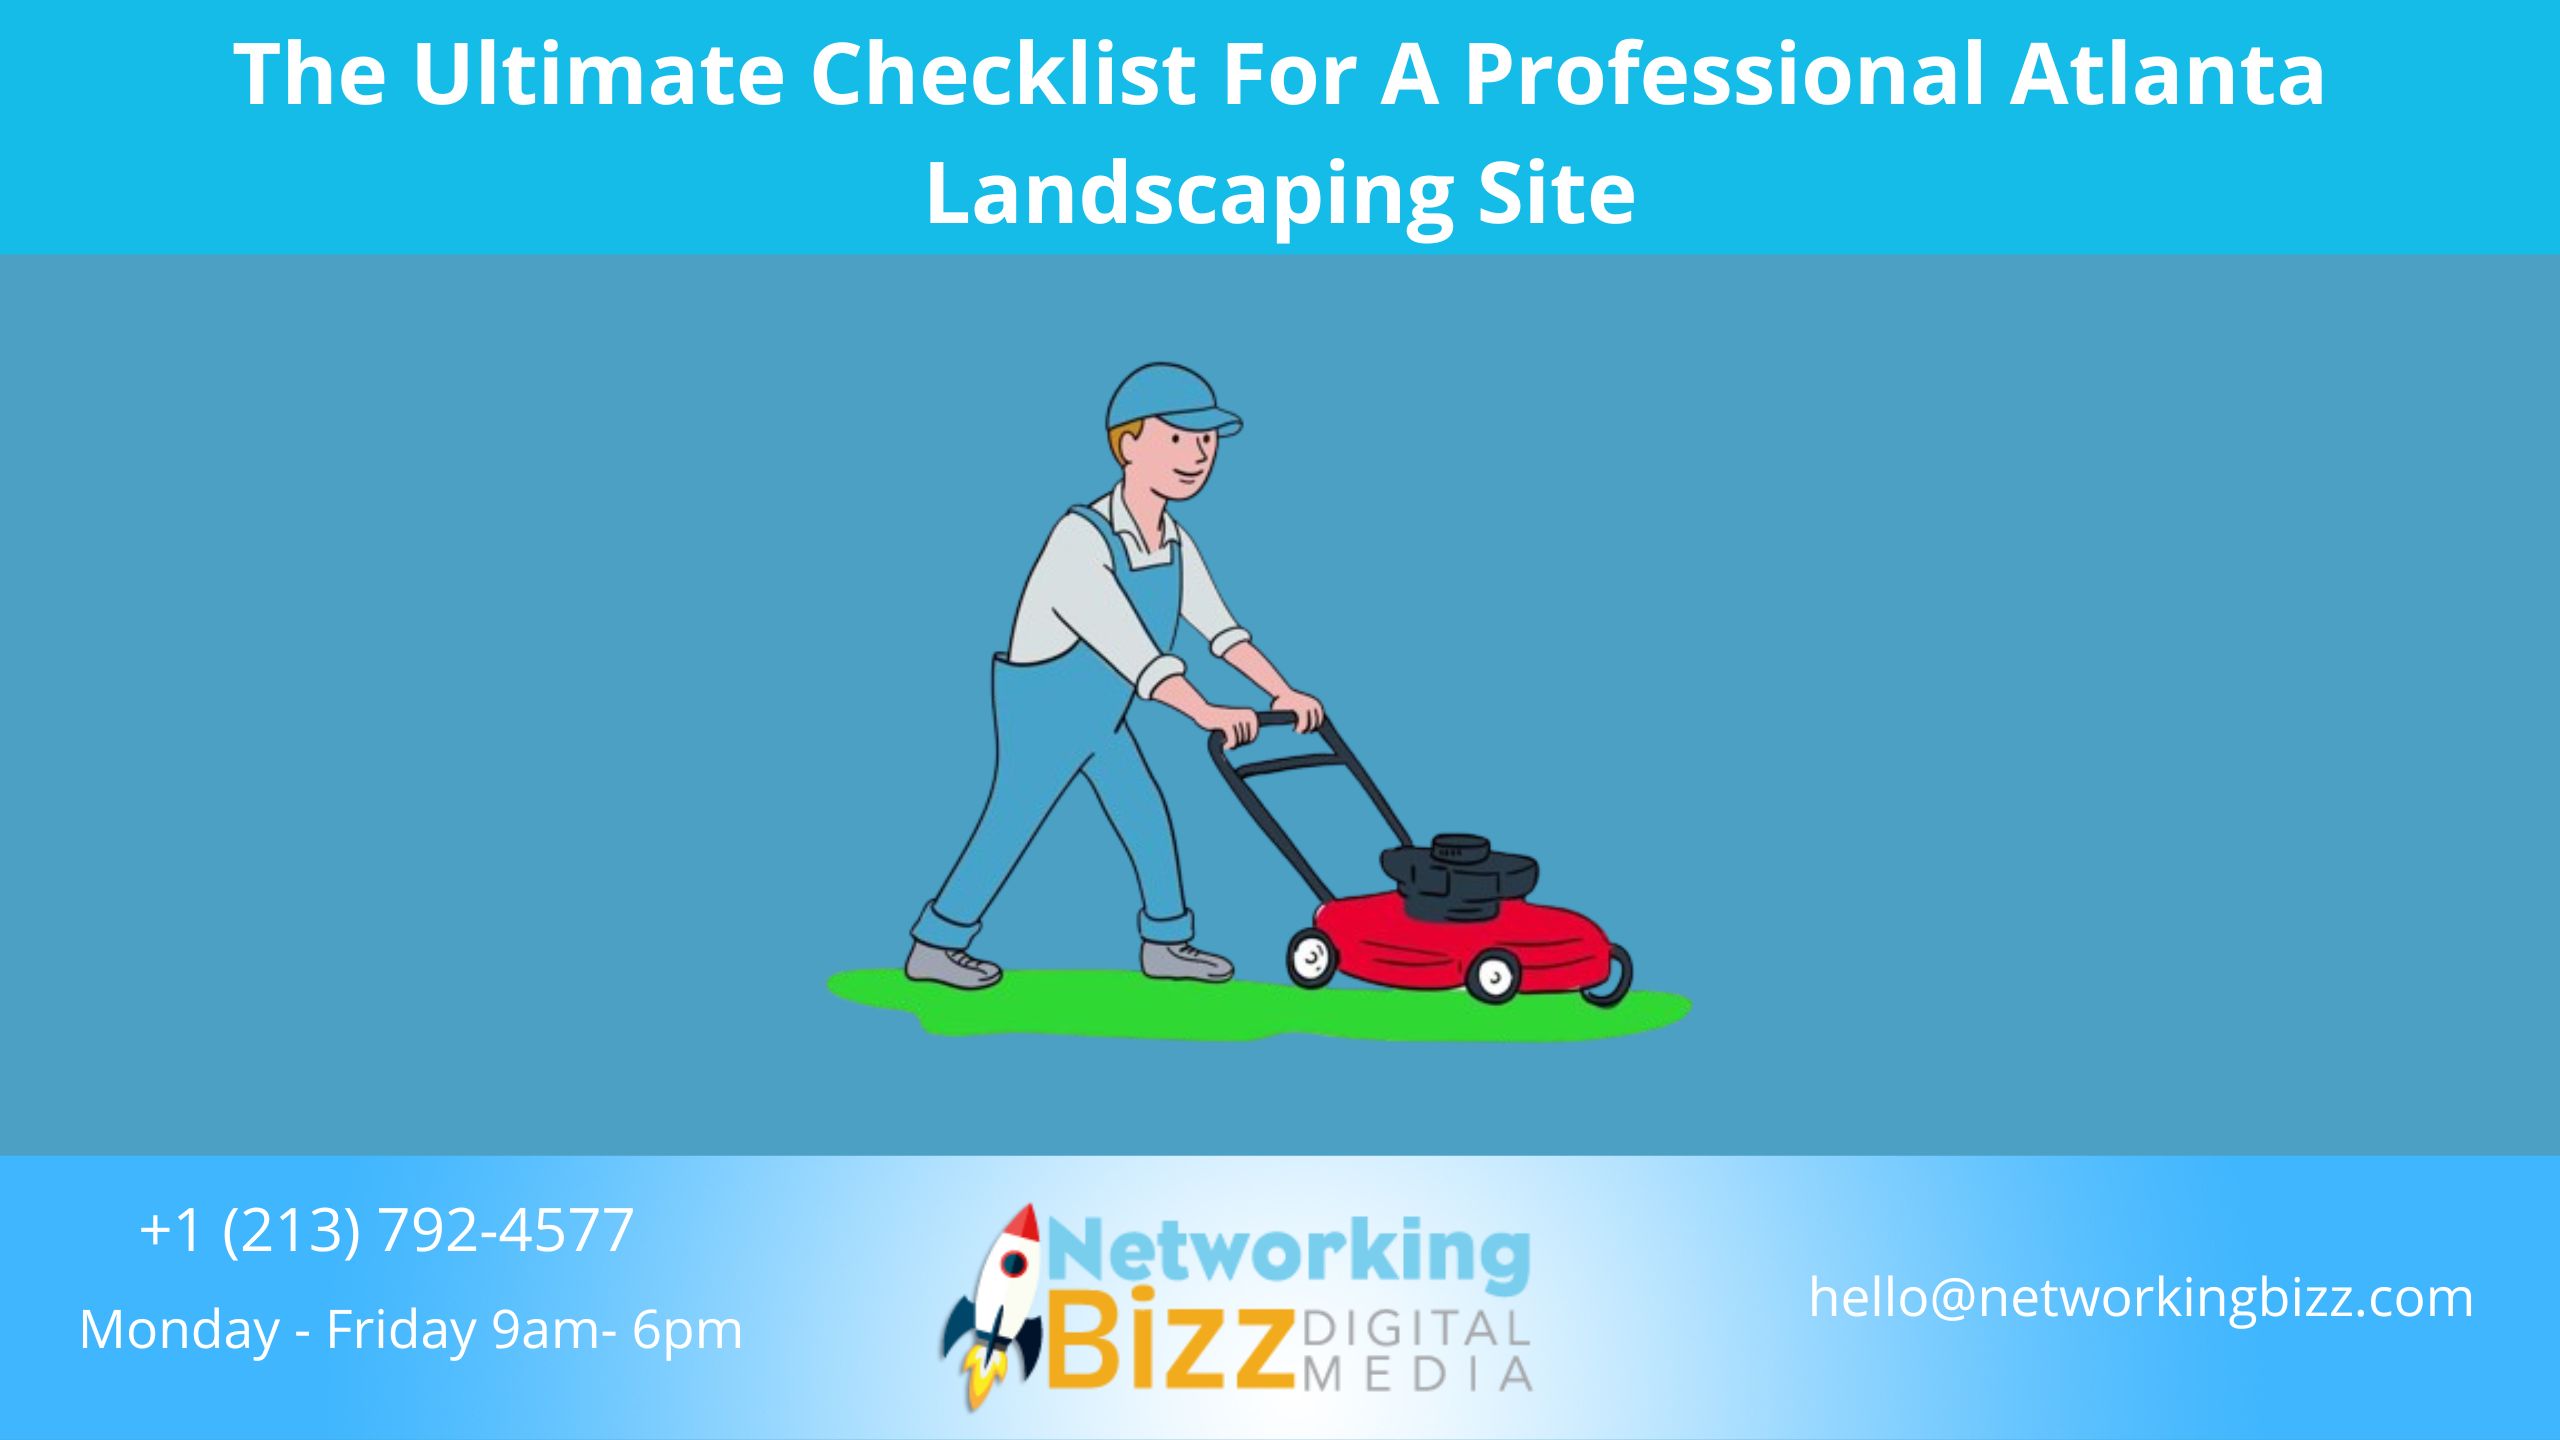 The Ultimate Checklist For A Professional Atlanta Landscaping Site